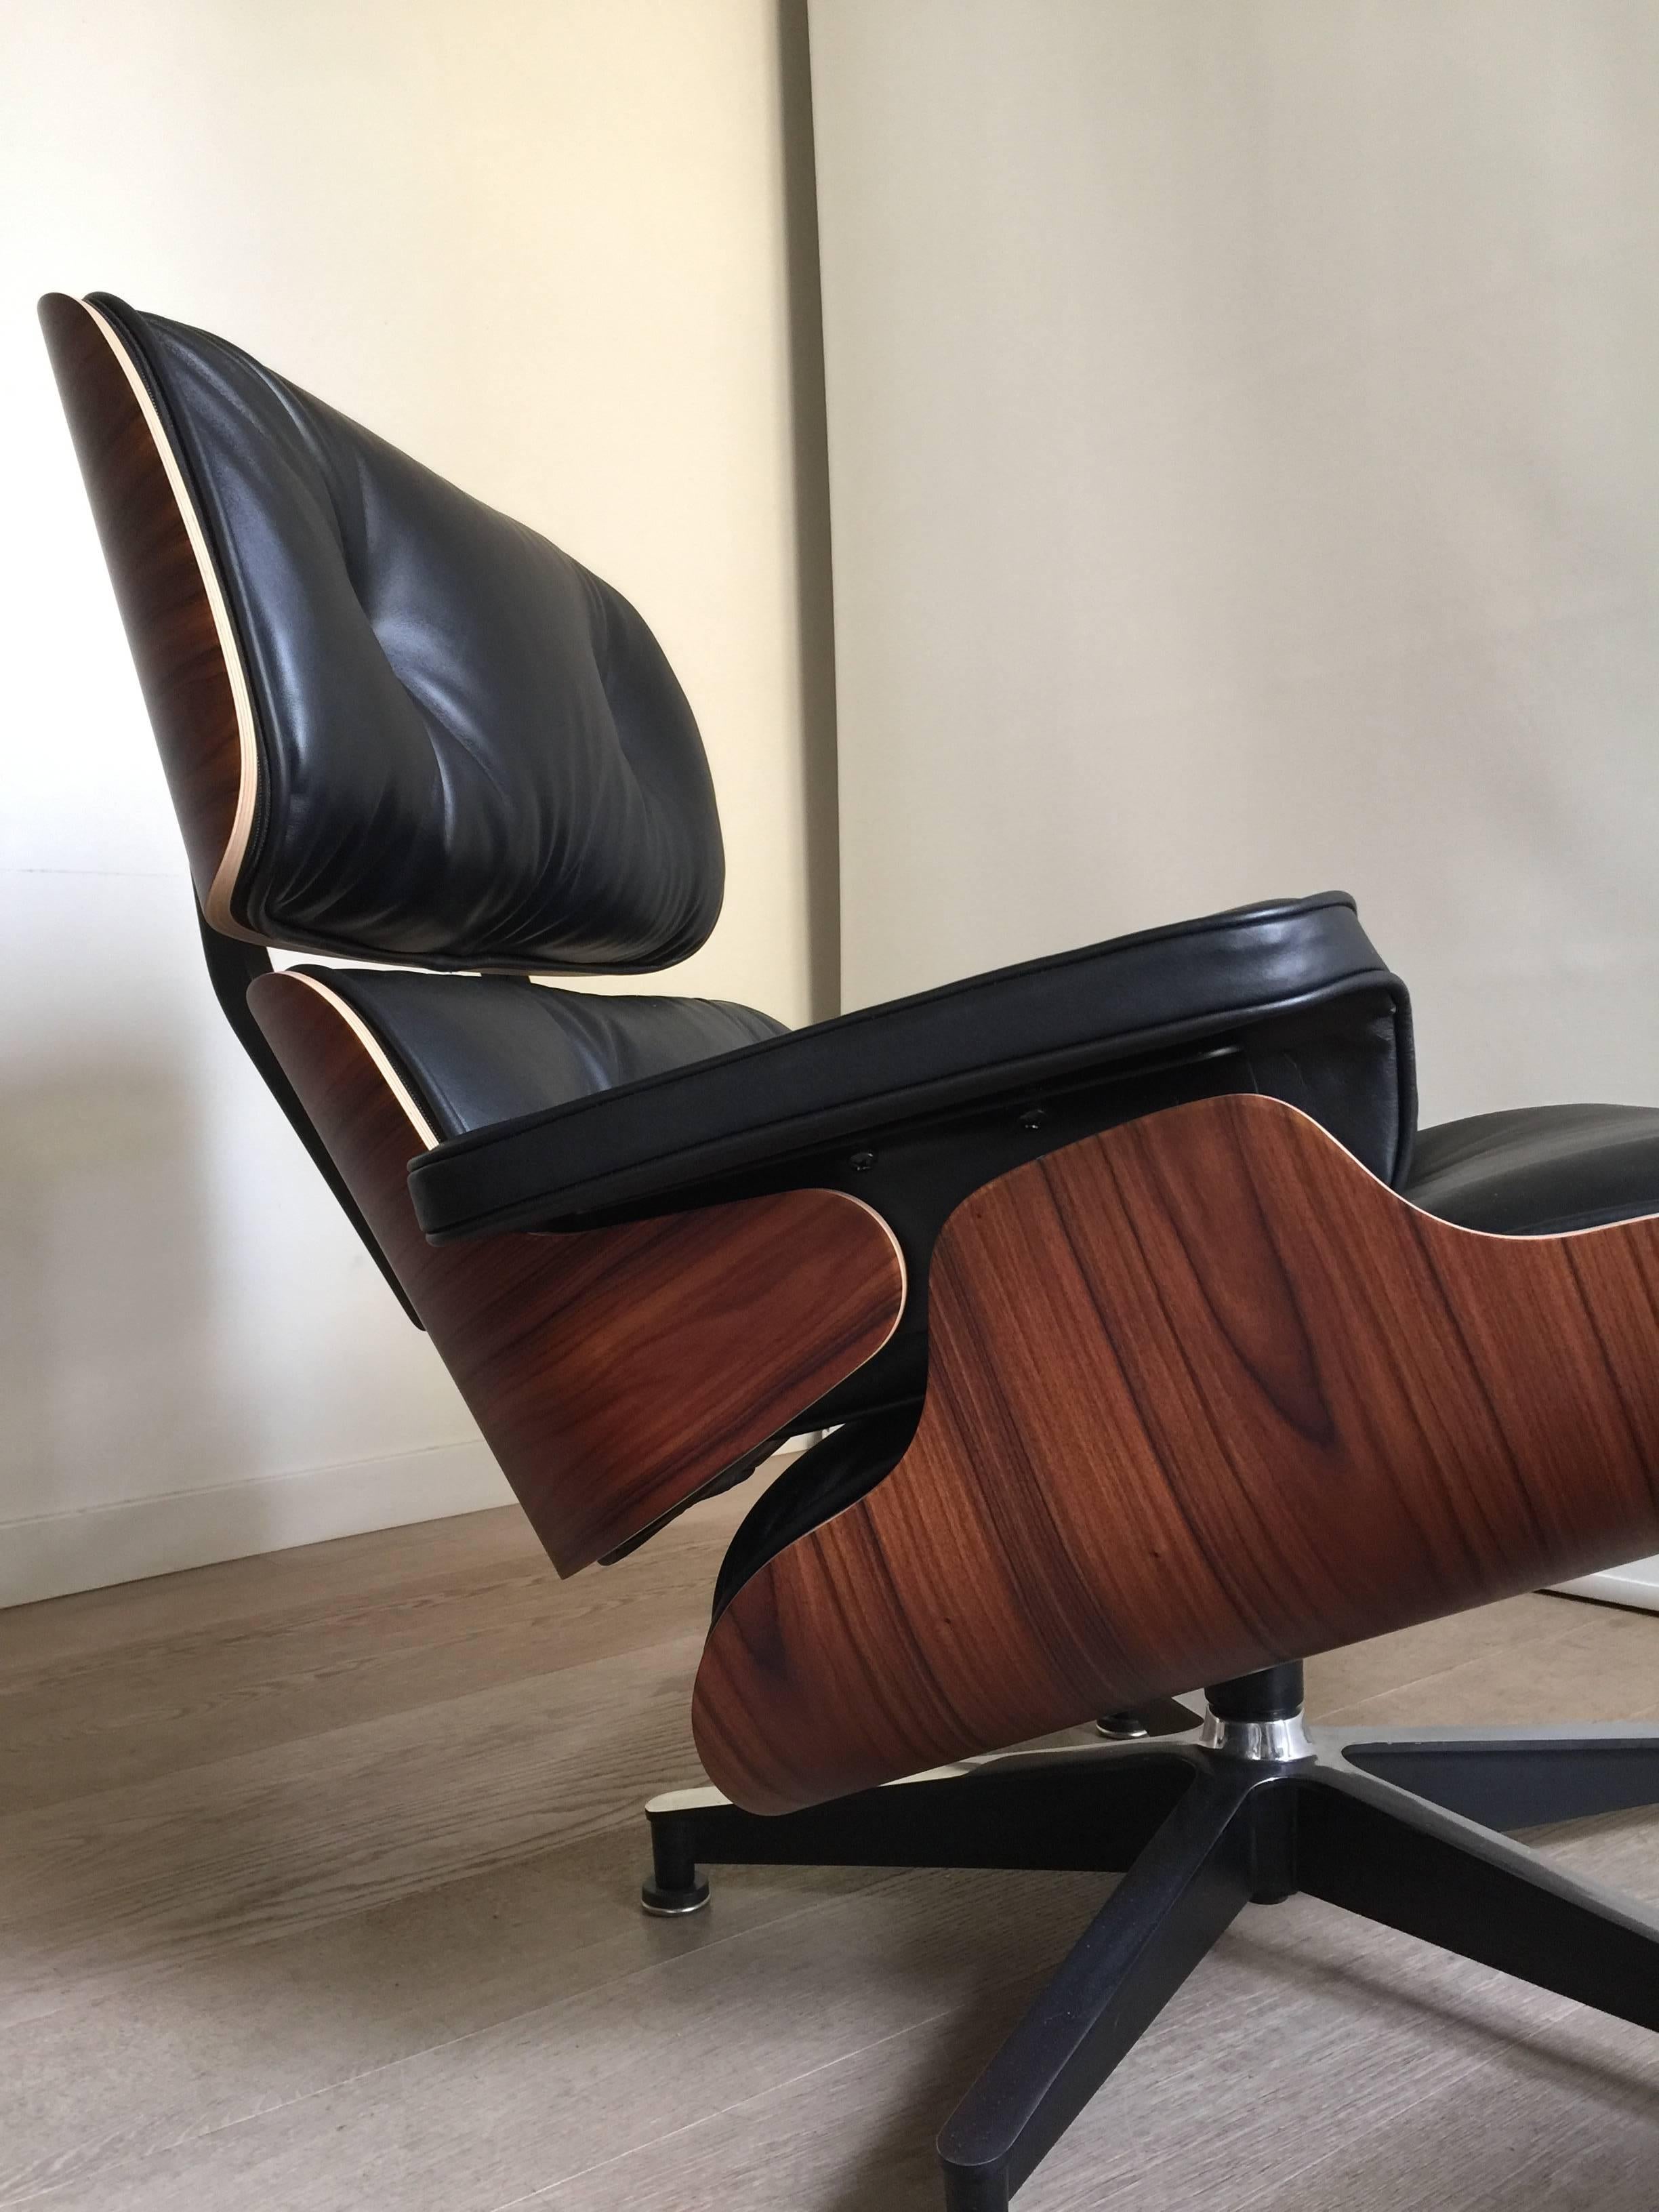 American Eames Lounge Chair and Ottoman, Rosewood, Herman Miller